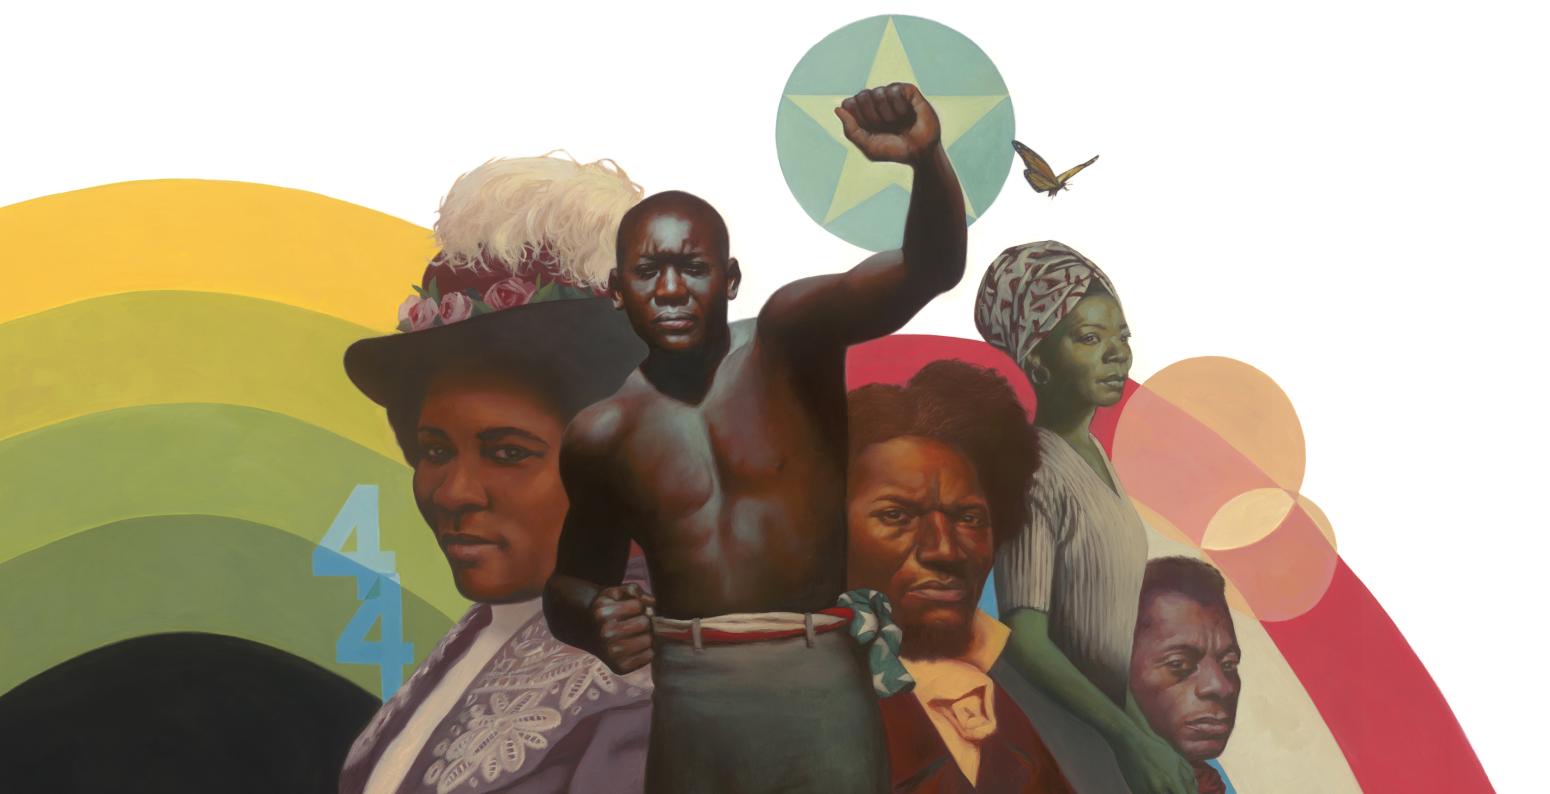 Illustration of famous Black artists, authors, athletes, and activists. 